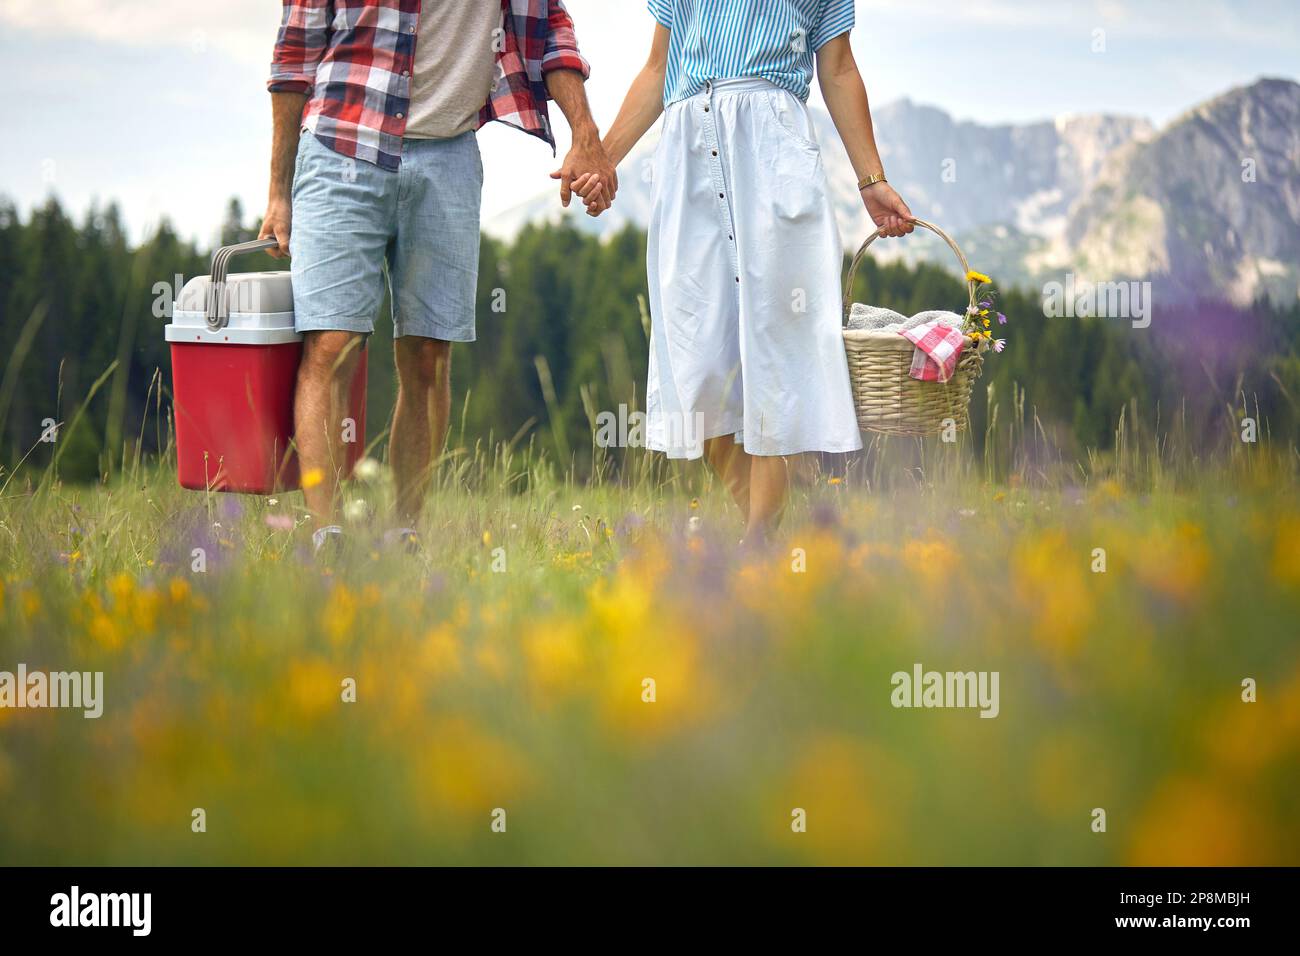 Young man and woman in love holding hands.Couple is holding picnic equipment. Stock Photo